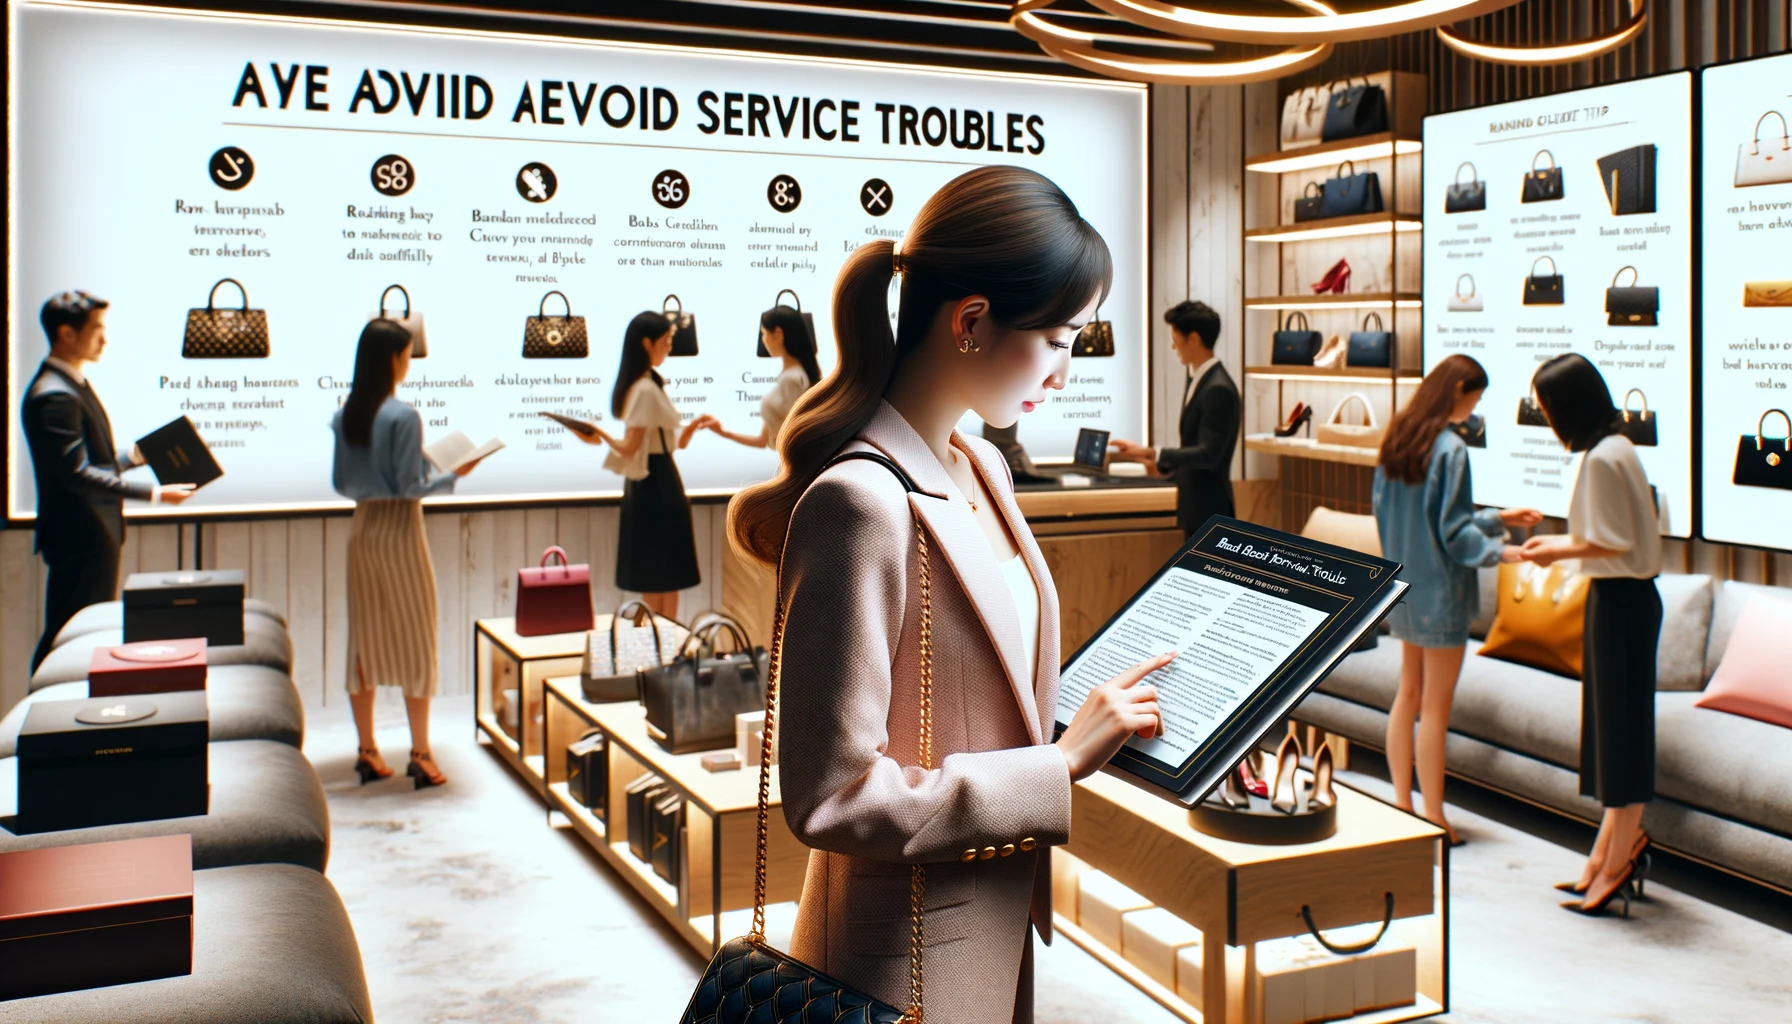 An informative scene inside a brand handbag rental service boutique that highlights tips to avoid service troubles. The boutique is bustling with customers, but one smartly dressed woman stands out as she consults a detailed guidebook on best practices for renting handbags. The guidebook includes tips like reading terms carefully, checking bag conditions, and confirming return policies. Around her, other customers interact with staff and digital displays that provide additional service details, in a well-lit, stylish store setting.